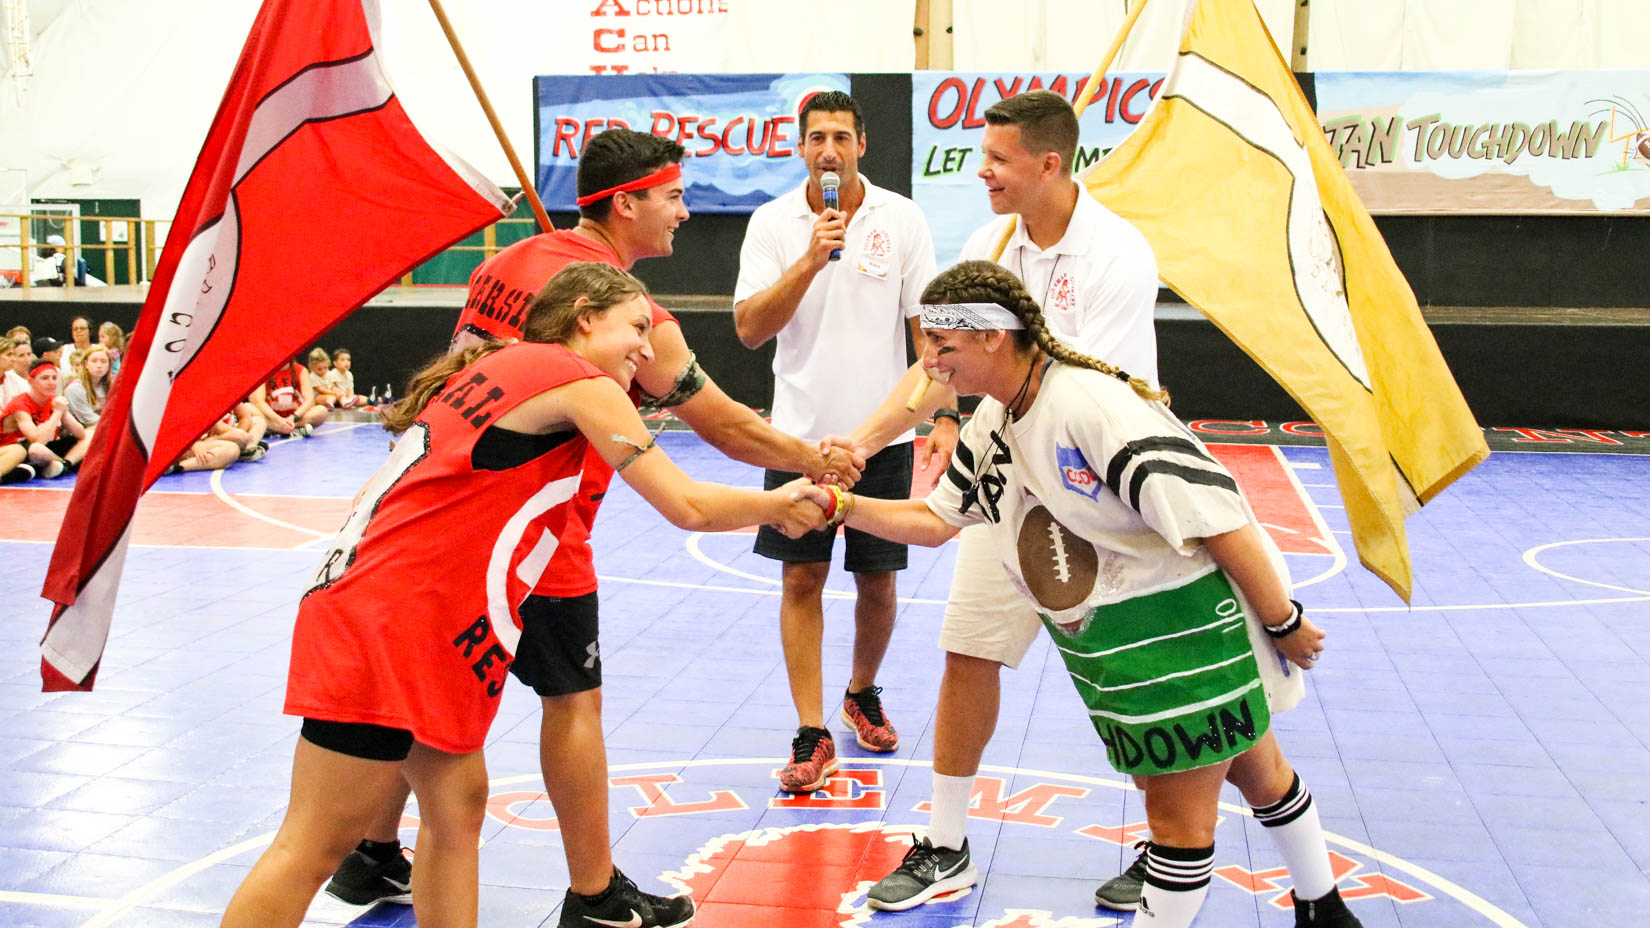 Opposing sides of camp Olympics shake hands